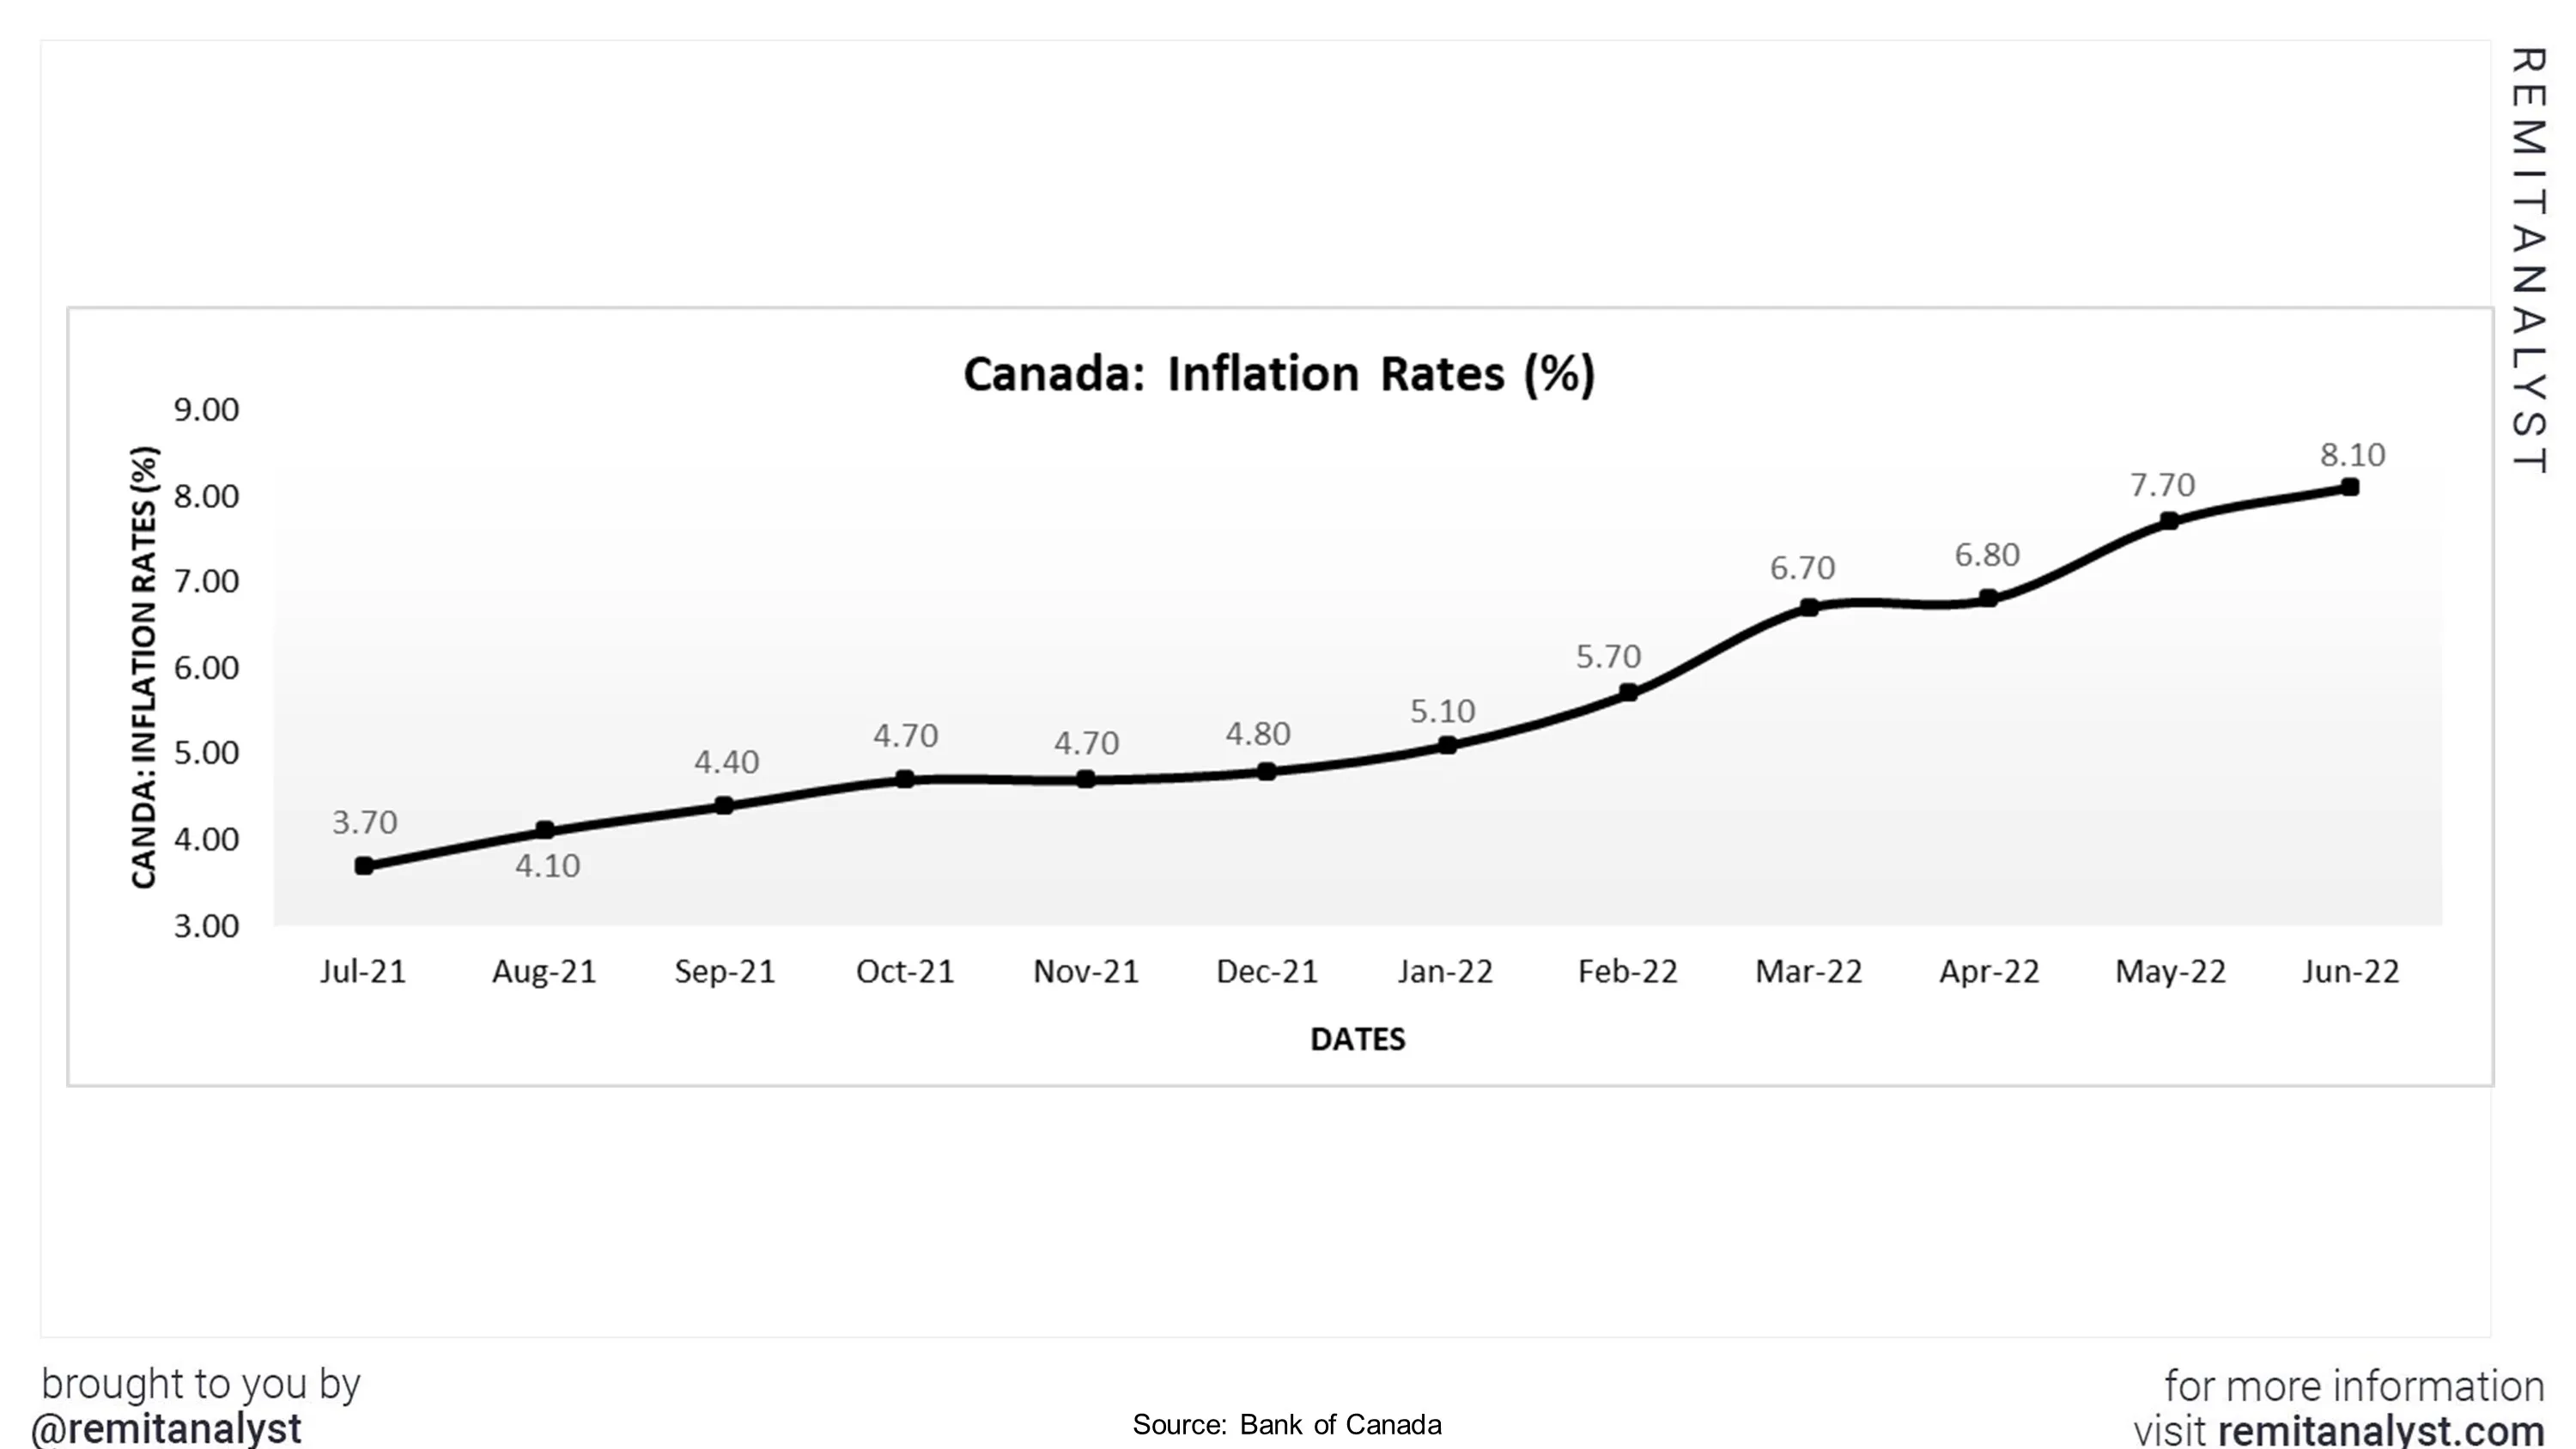 inflation-rates-canada-from-july-2021-to-june-2022